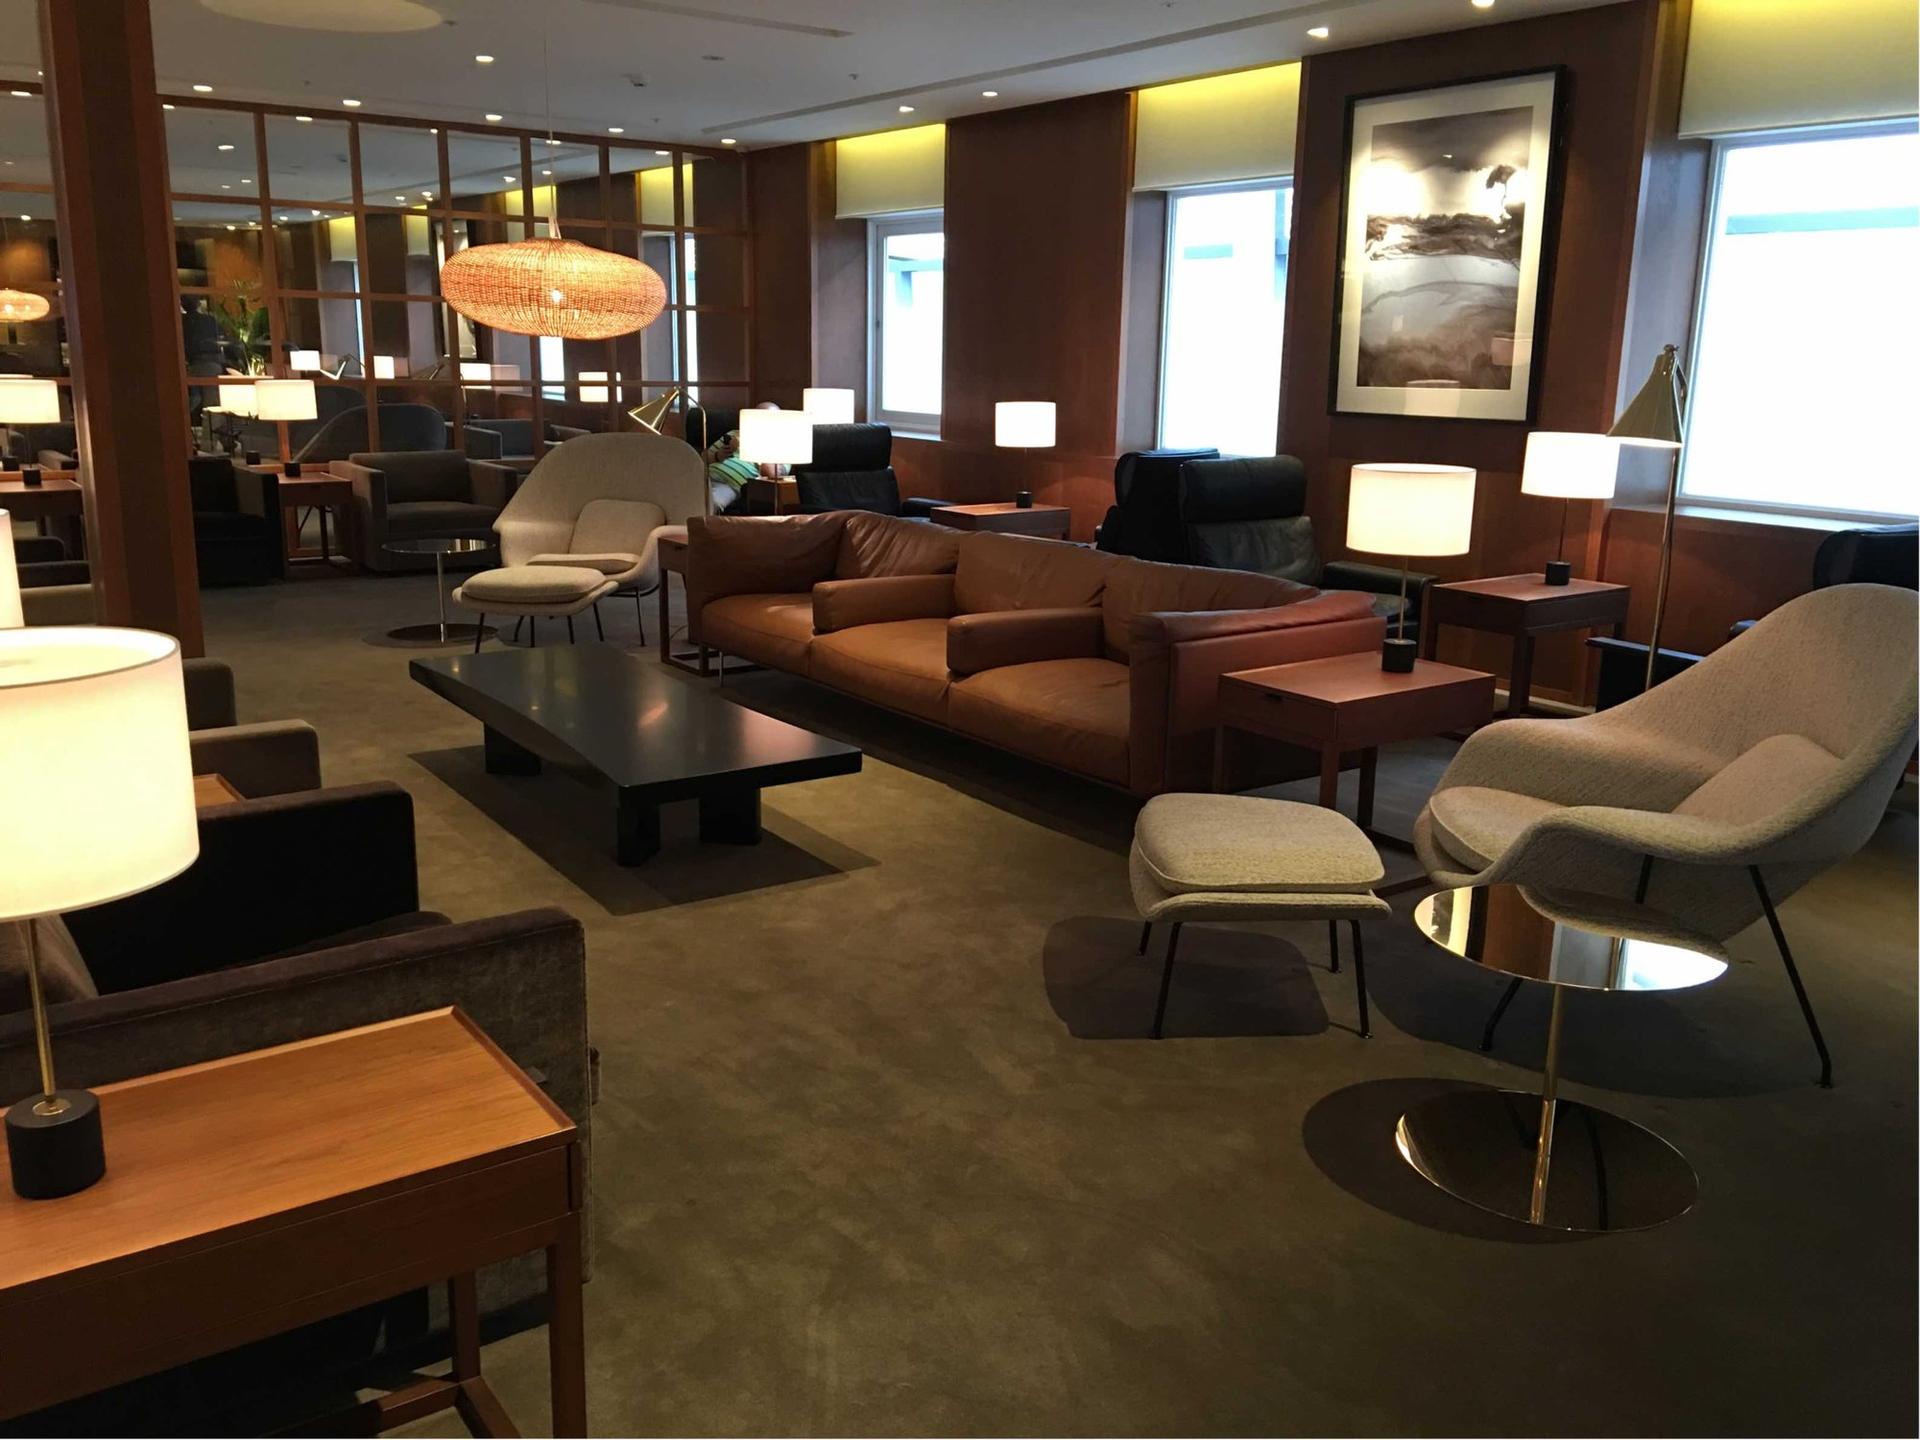 Cathay Pacific Lounge image 5 of 37